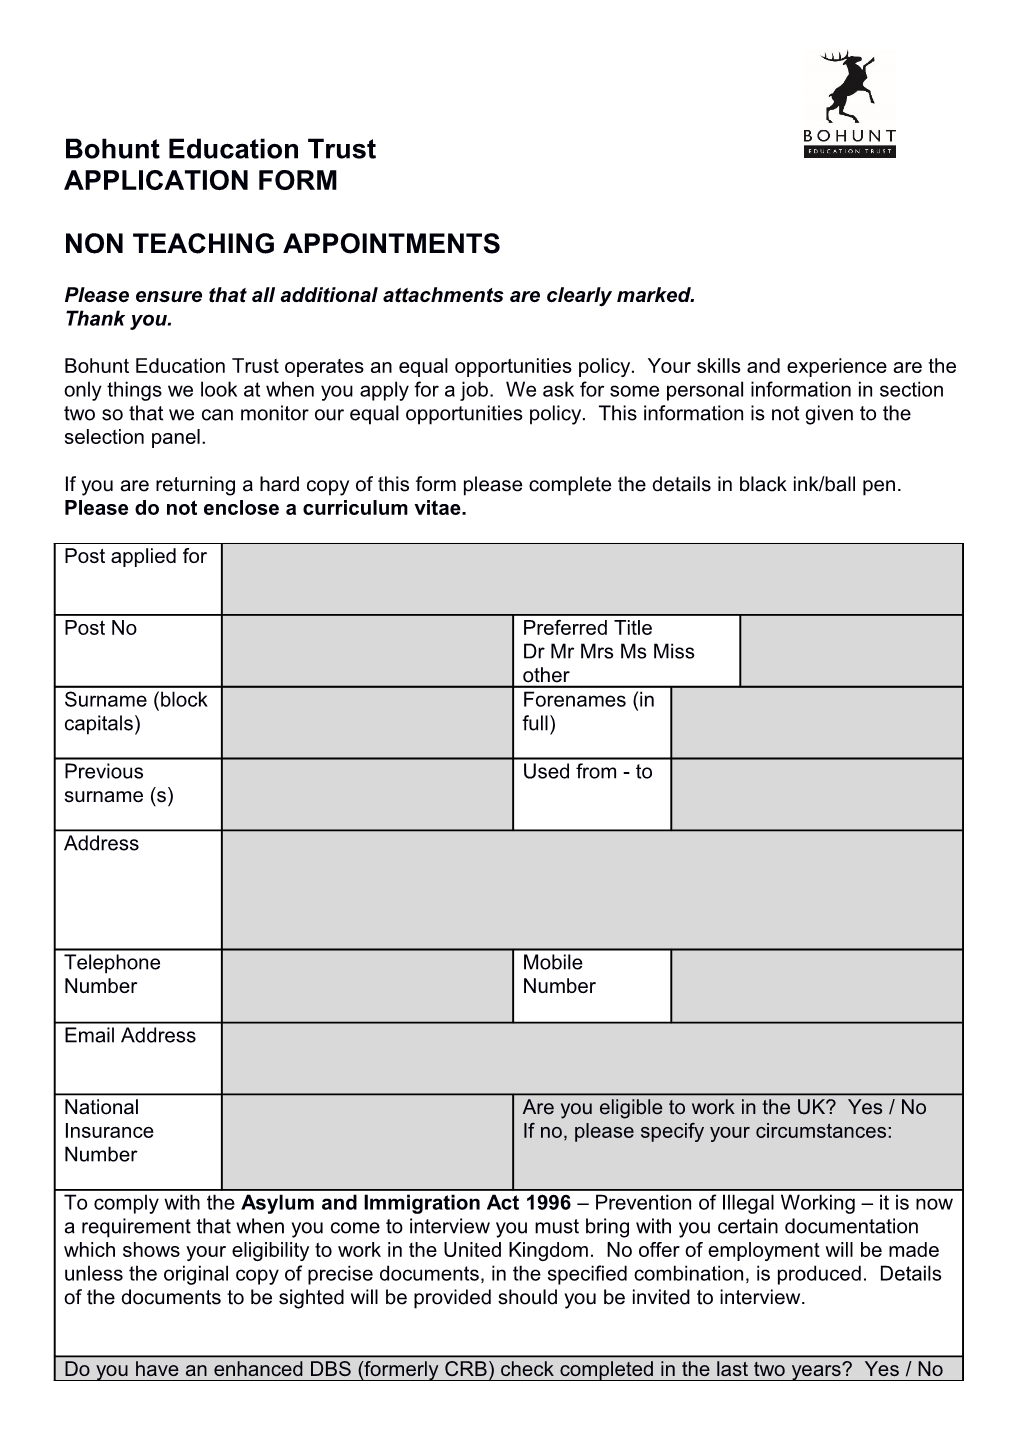 Non Teaching Appointments